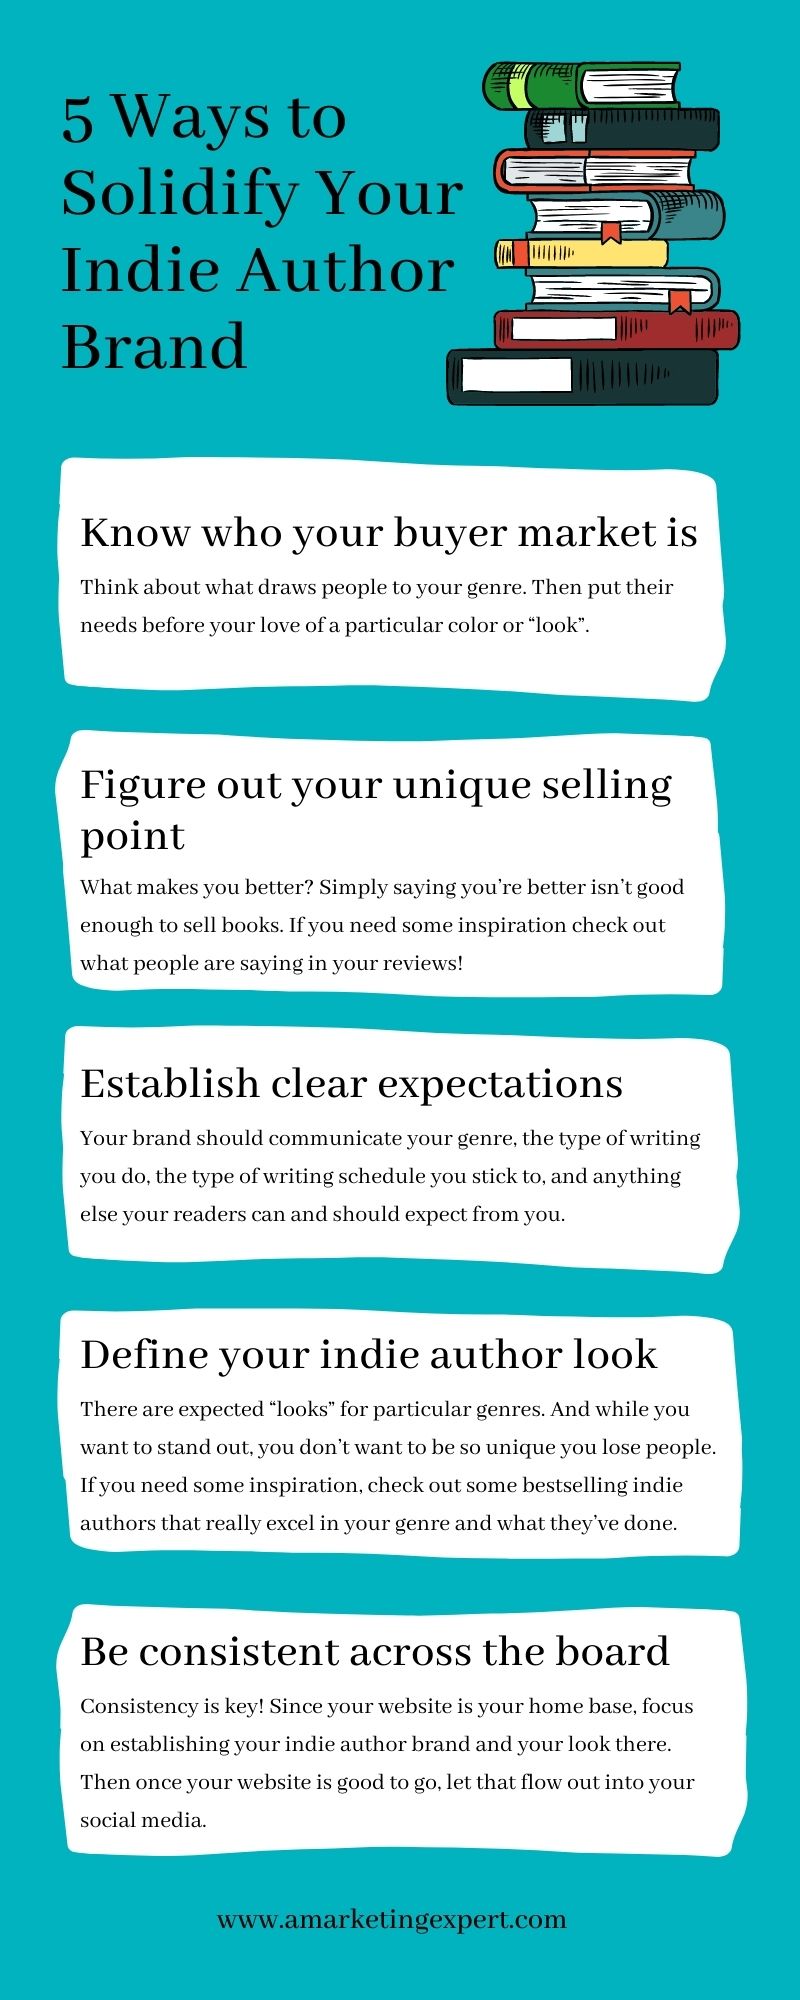 5-ways-to-solidify-your-indie-author-brand (1)